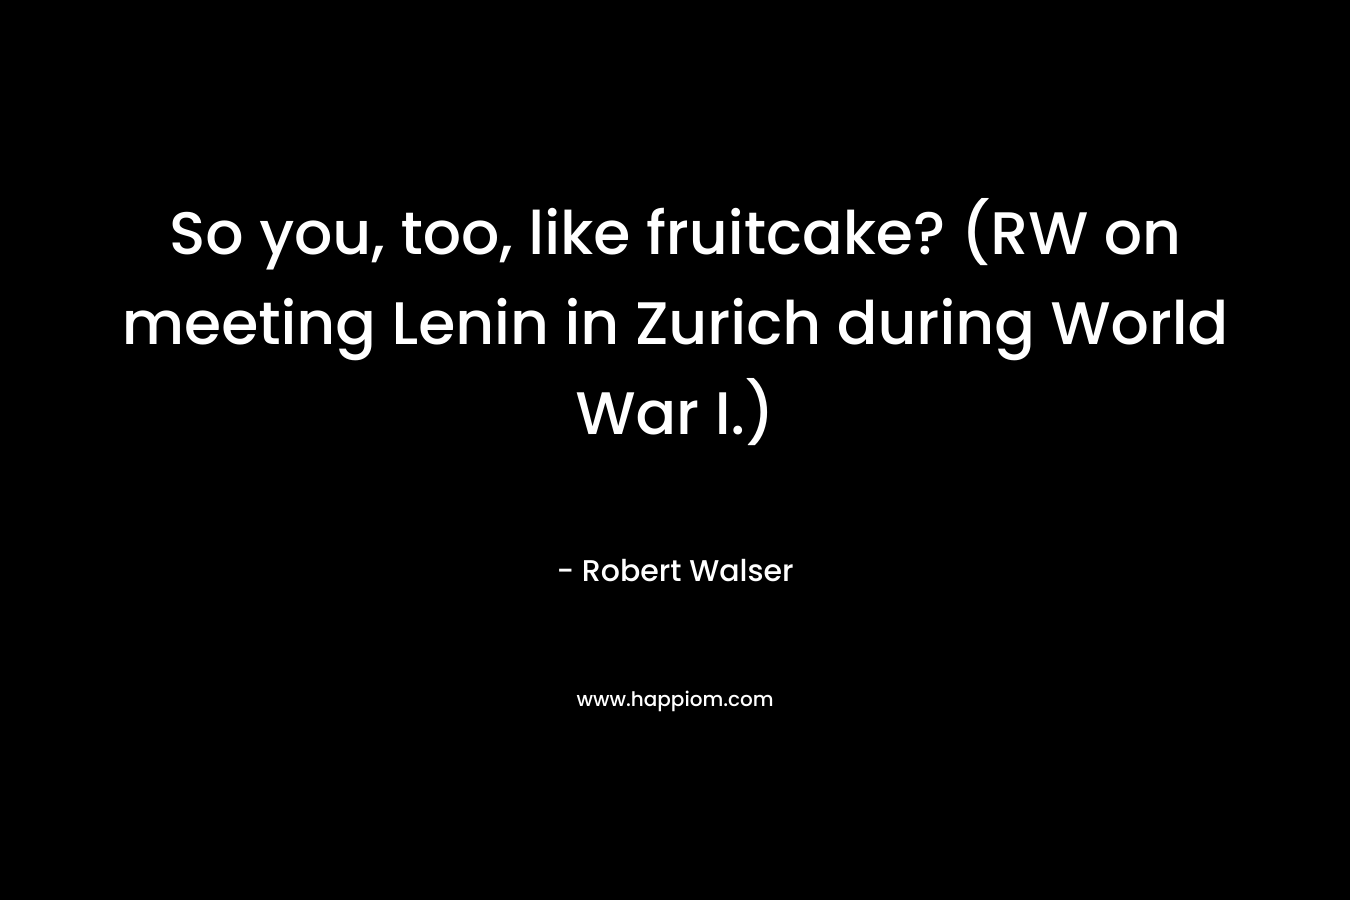 So you, too, like fruitcake? (RW on meeting Lenin in Zurich during World War I.)